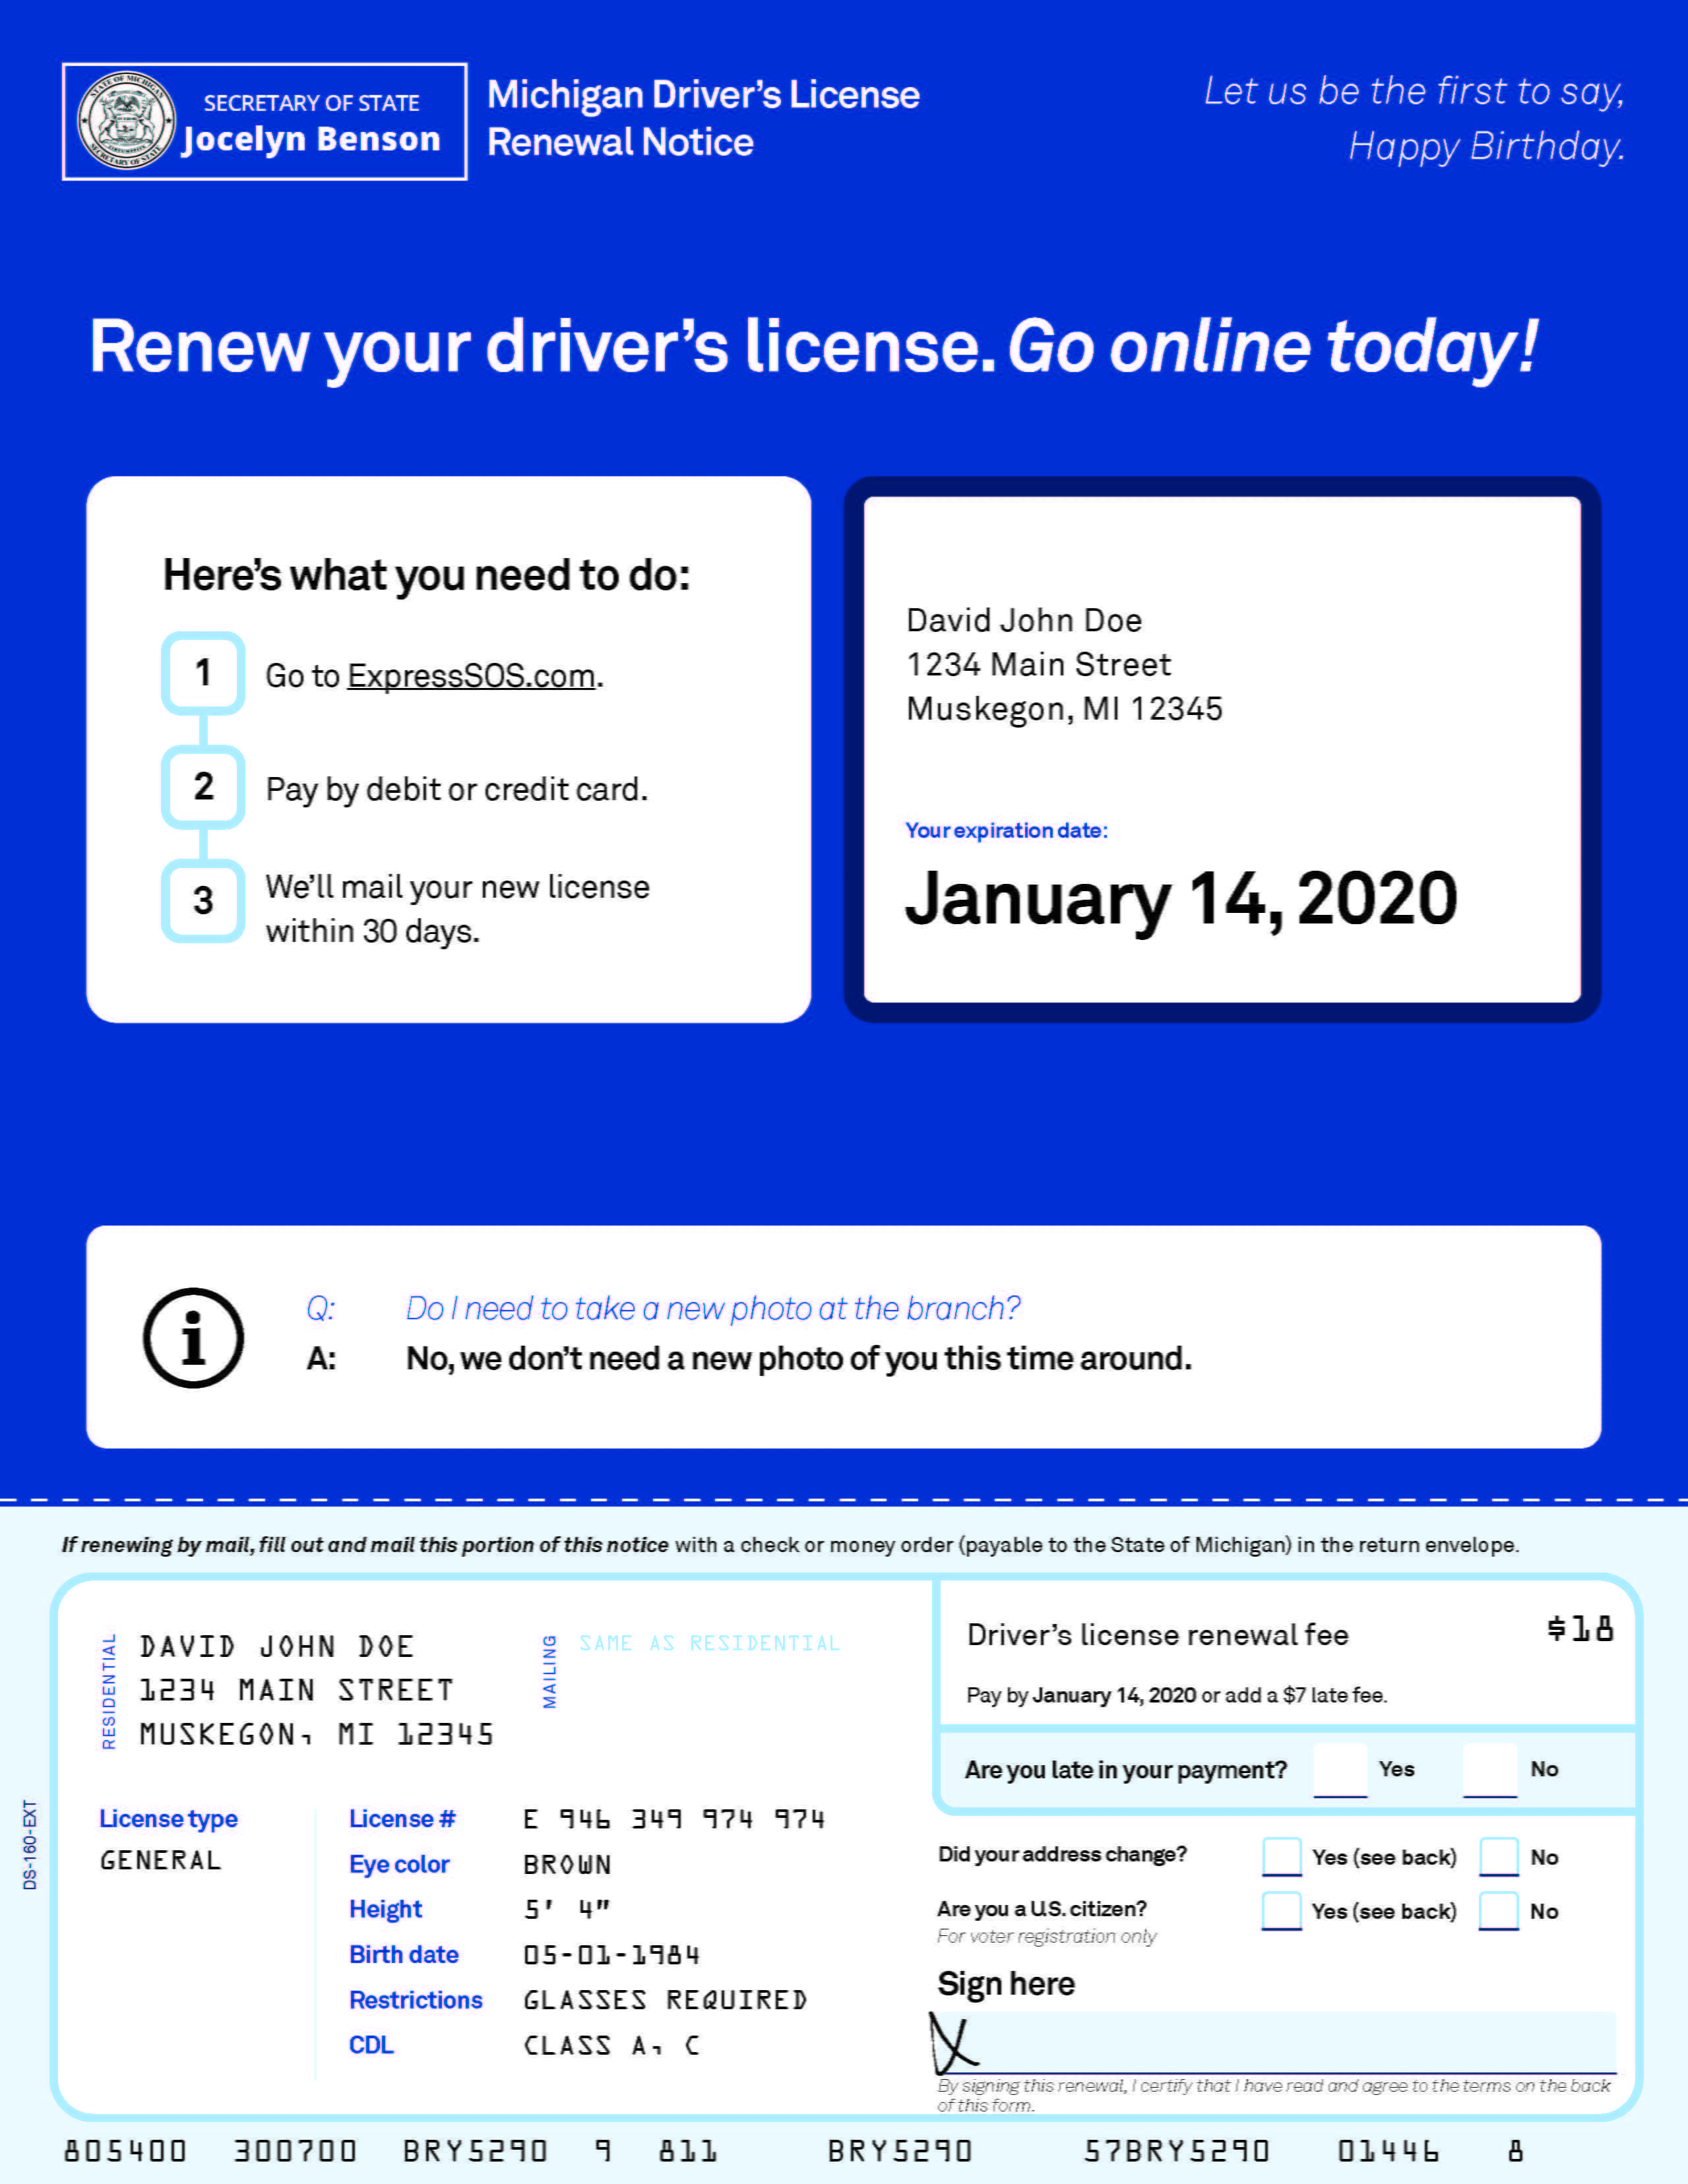 can you renew your driver's license online after it expires